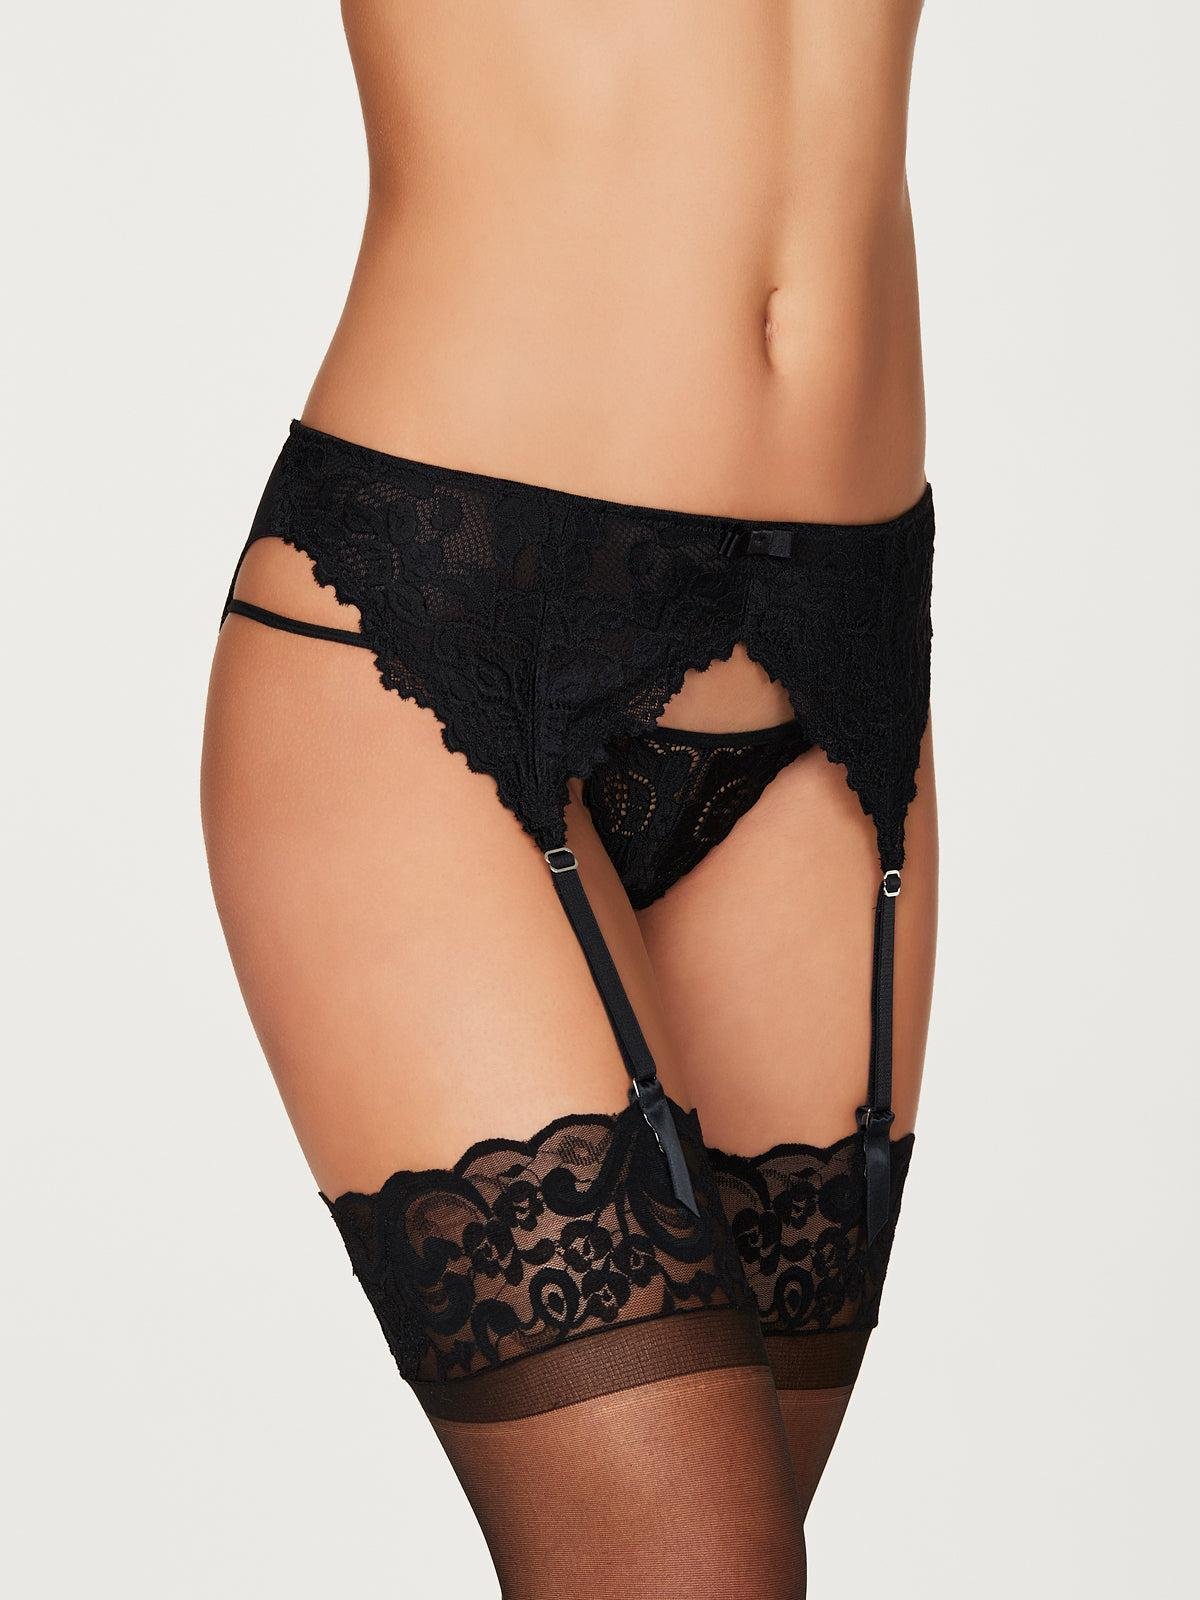 Jessica Lace Garter Belt in Black by FREDERICK'S OF HOLLYWOOD